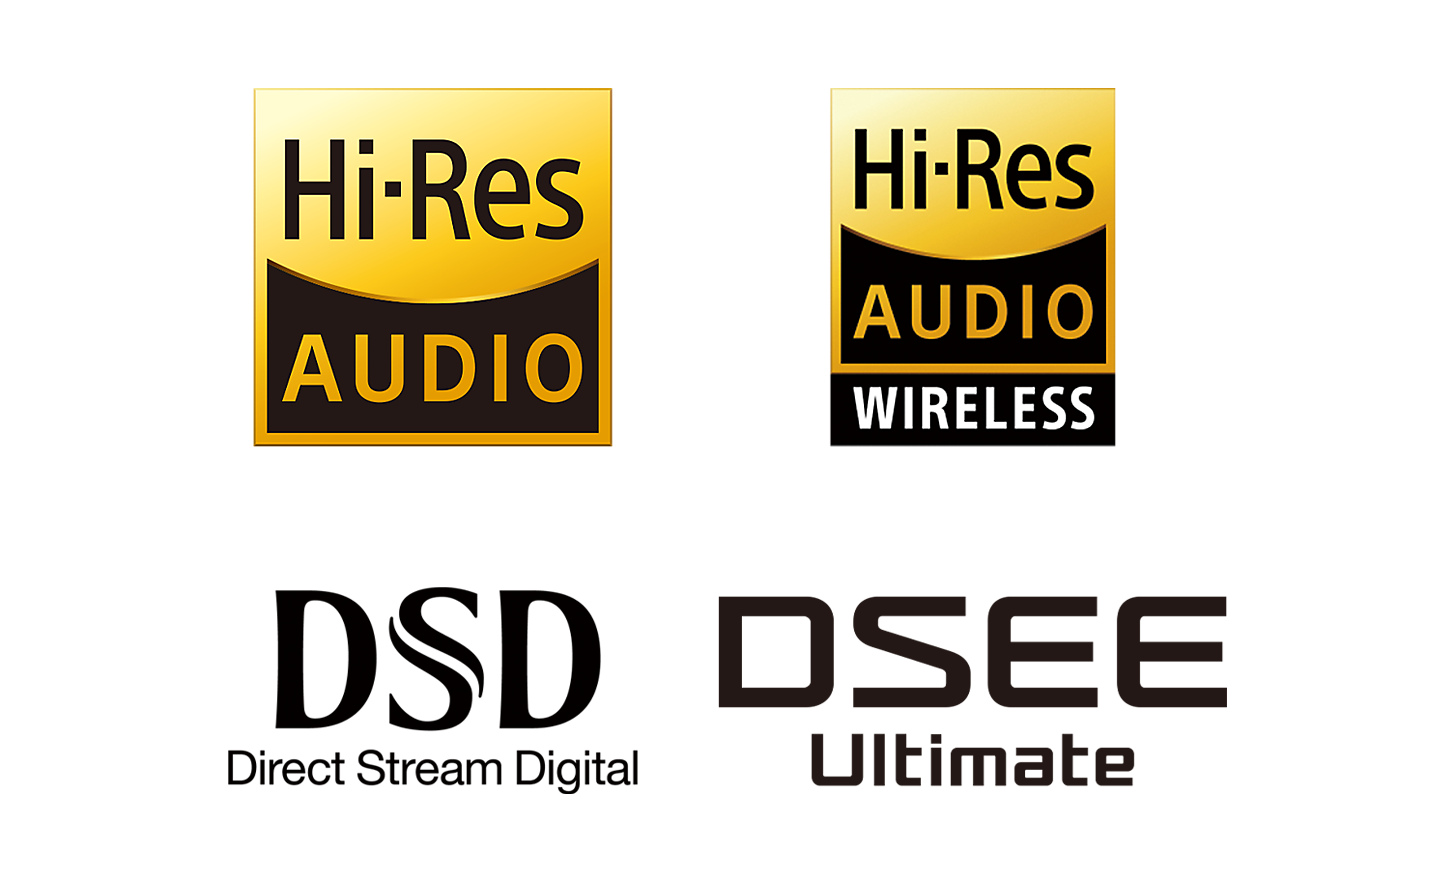 High-Res Audio, High-Res Audio WIRELESS, DSD & DSEE logo's.